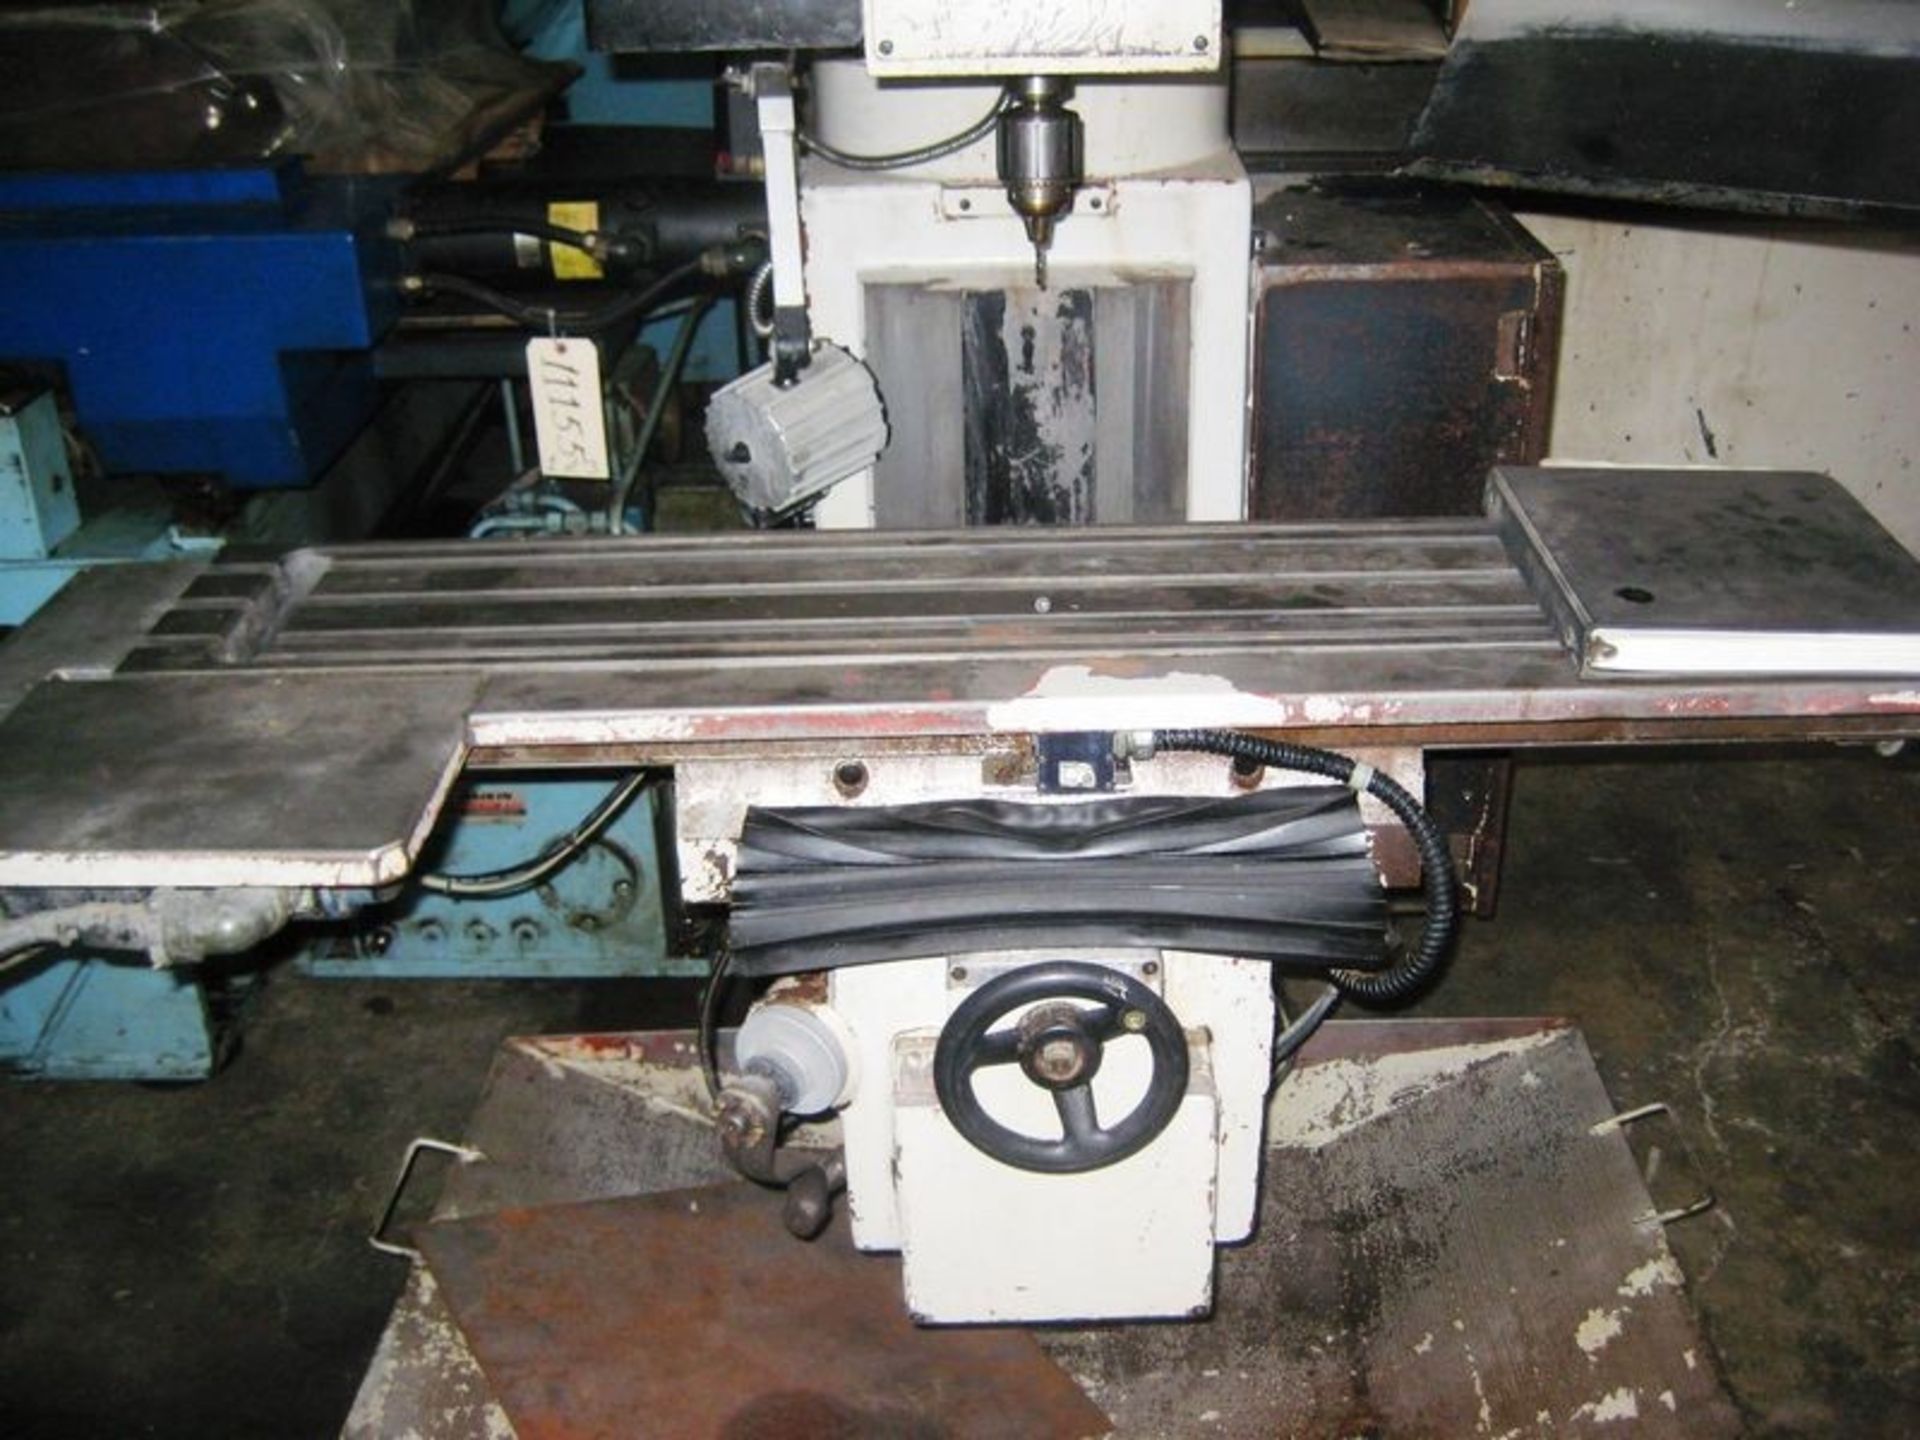 Vectrax Model GS-N16V 3-Axis CNC Knee Type Milling Machine, S/N 9030192NV, New 2001 General - Image 4 of 5